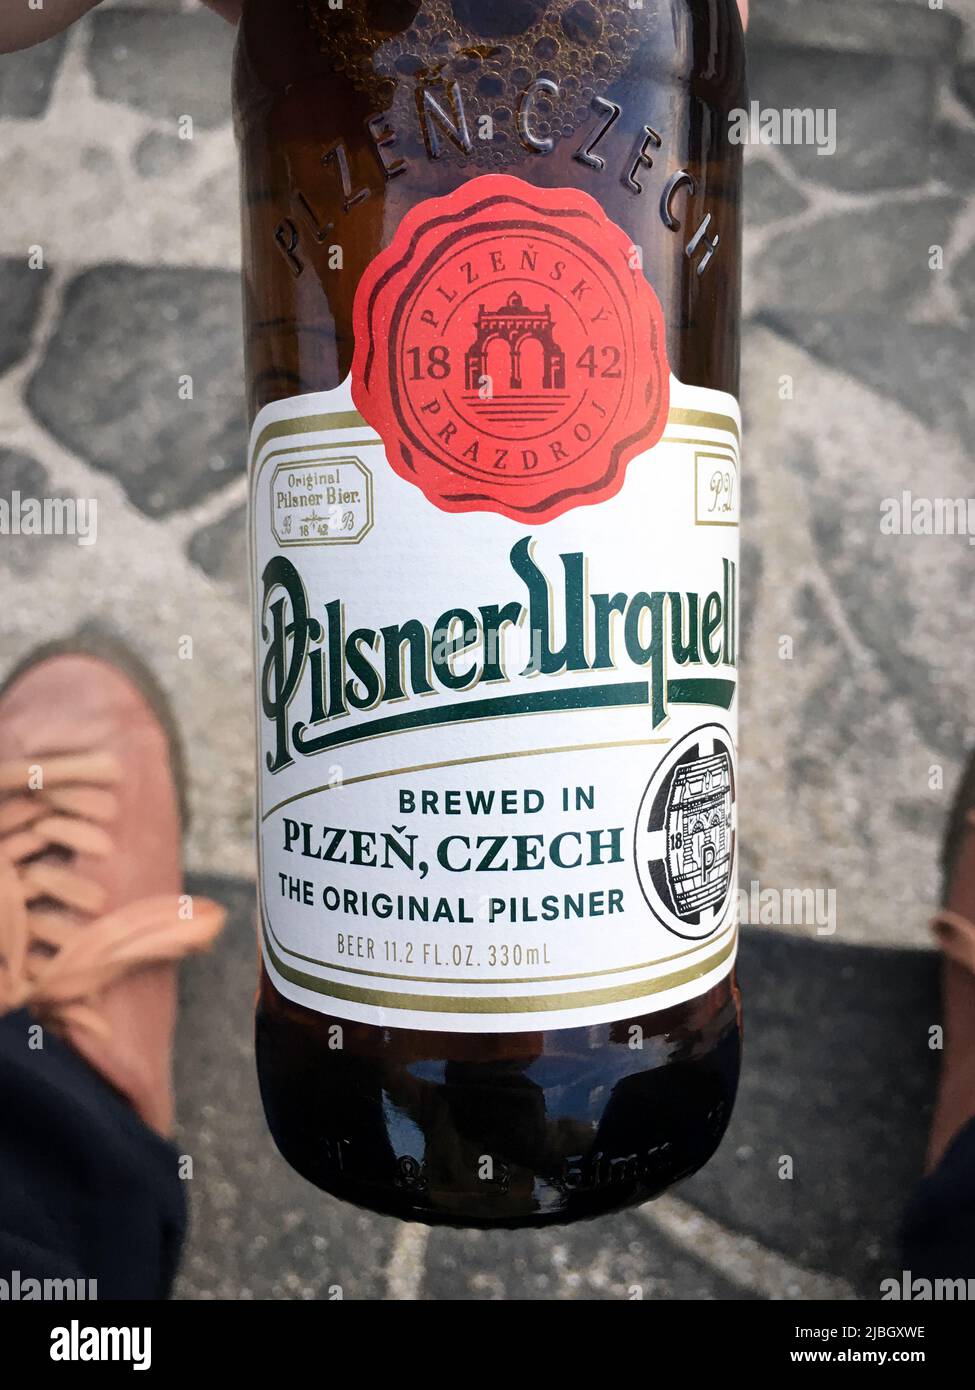 The bottle of Pilsner Urquell, Czech lager brewed by the Pilsner Urquell Brewery in Pilsen, in my hand. It is well known as the first pale lager Stock Photo